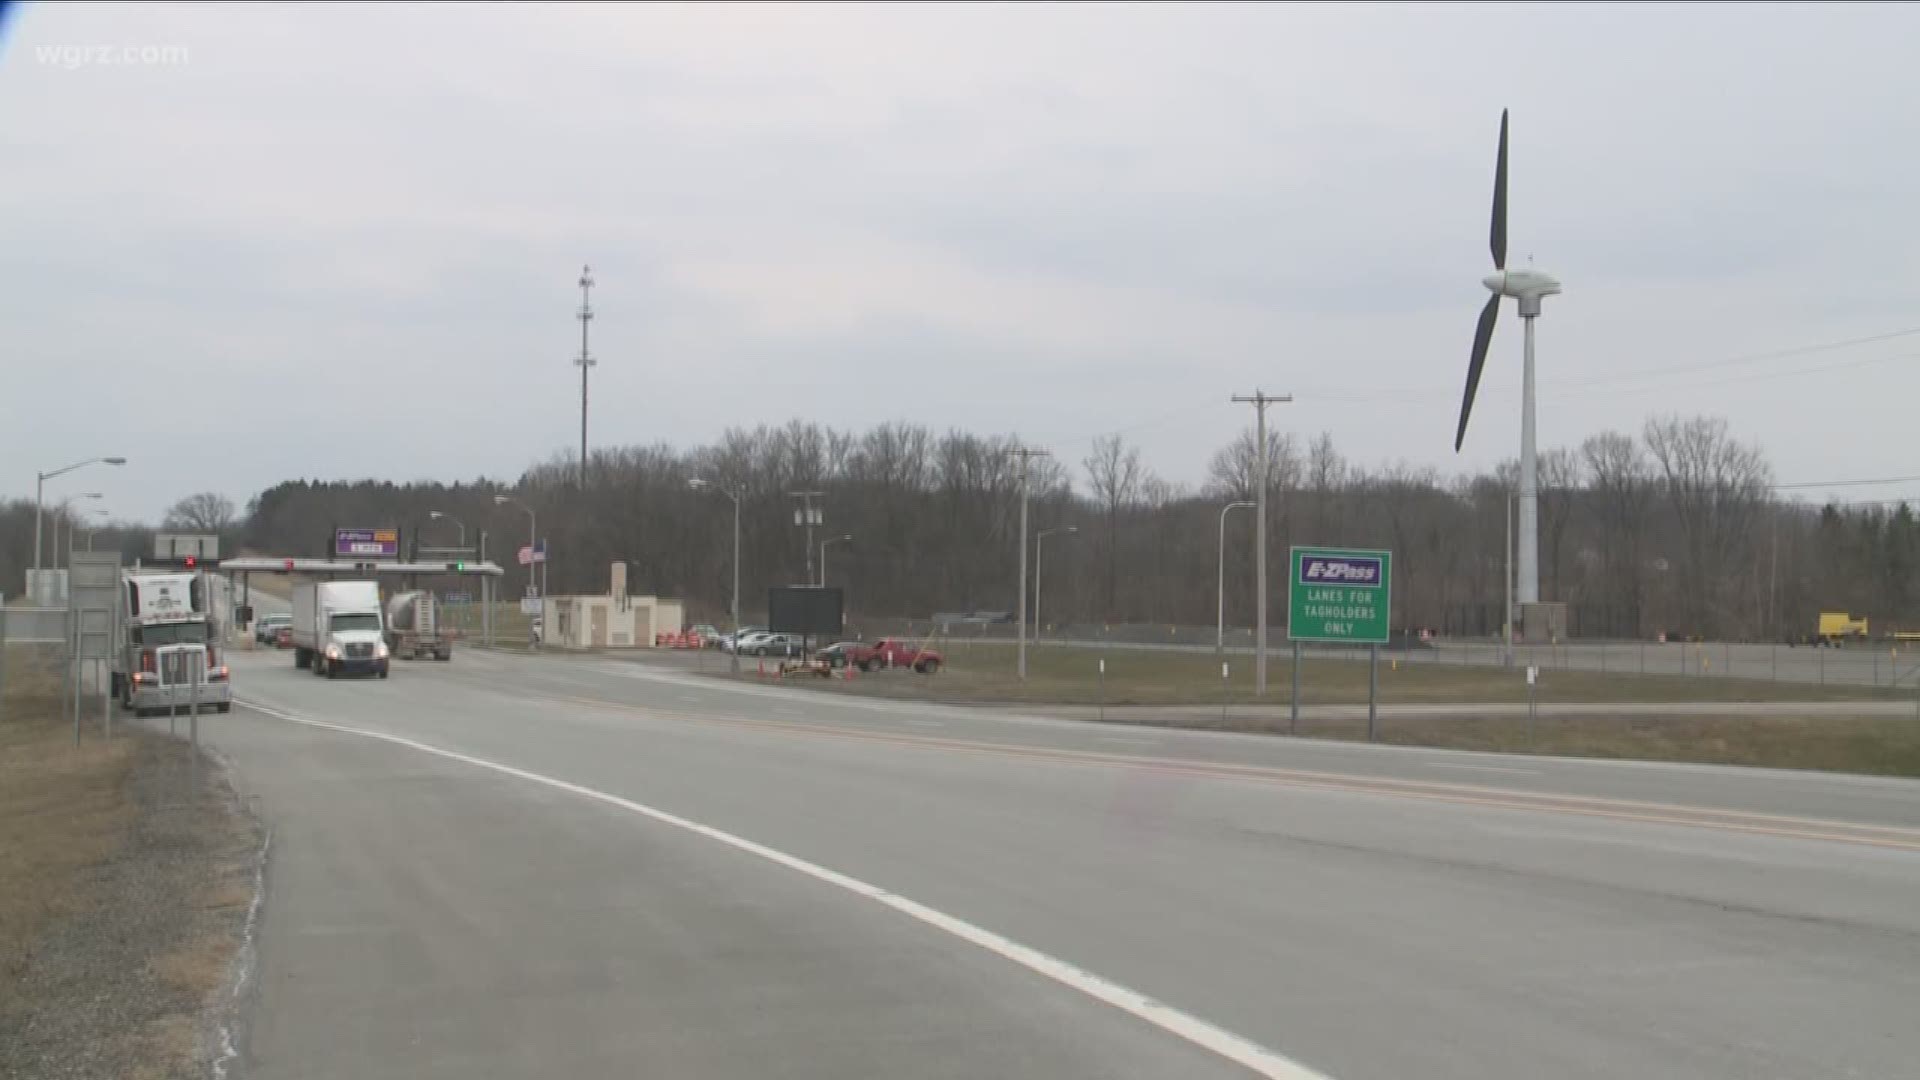 Thruway budgeted $4.8 million for wind turbines; 4 of 5 currently don't work